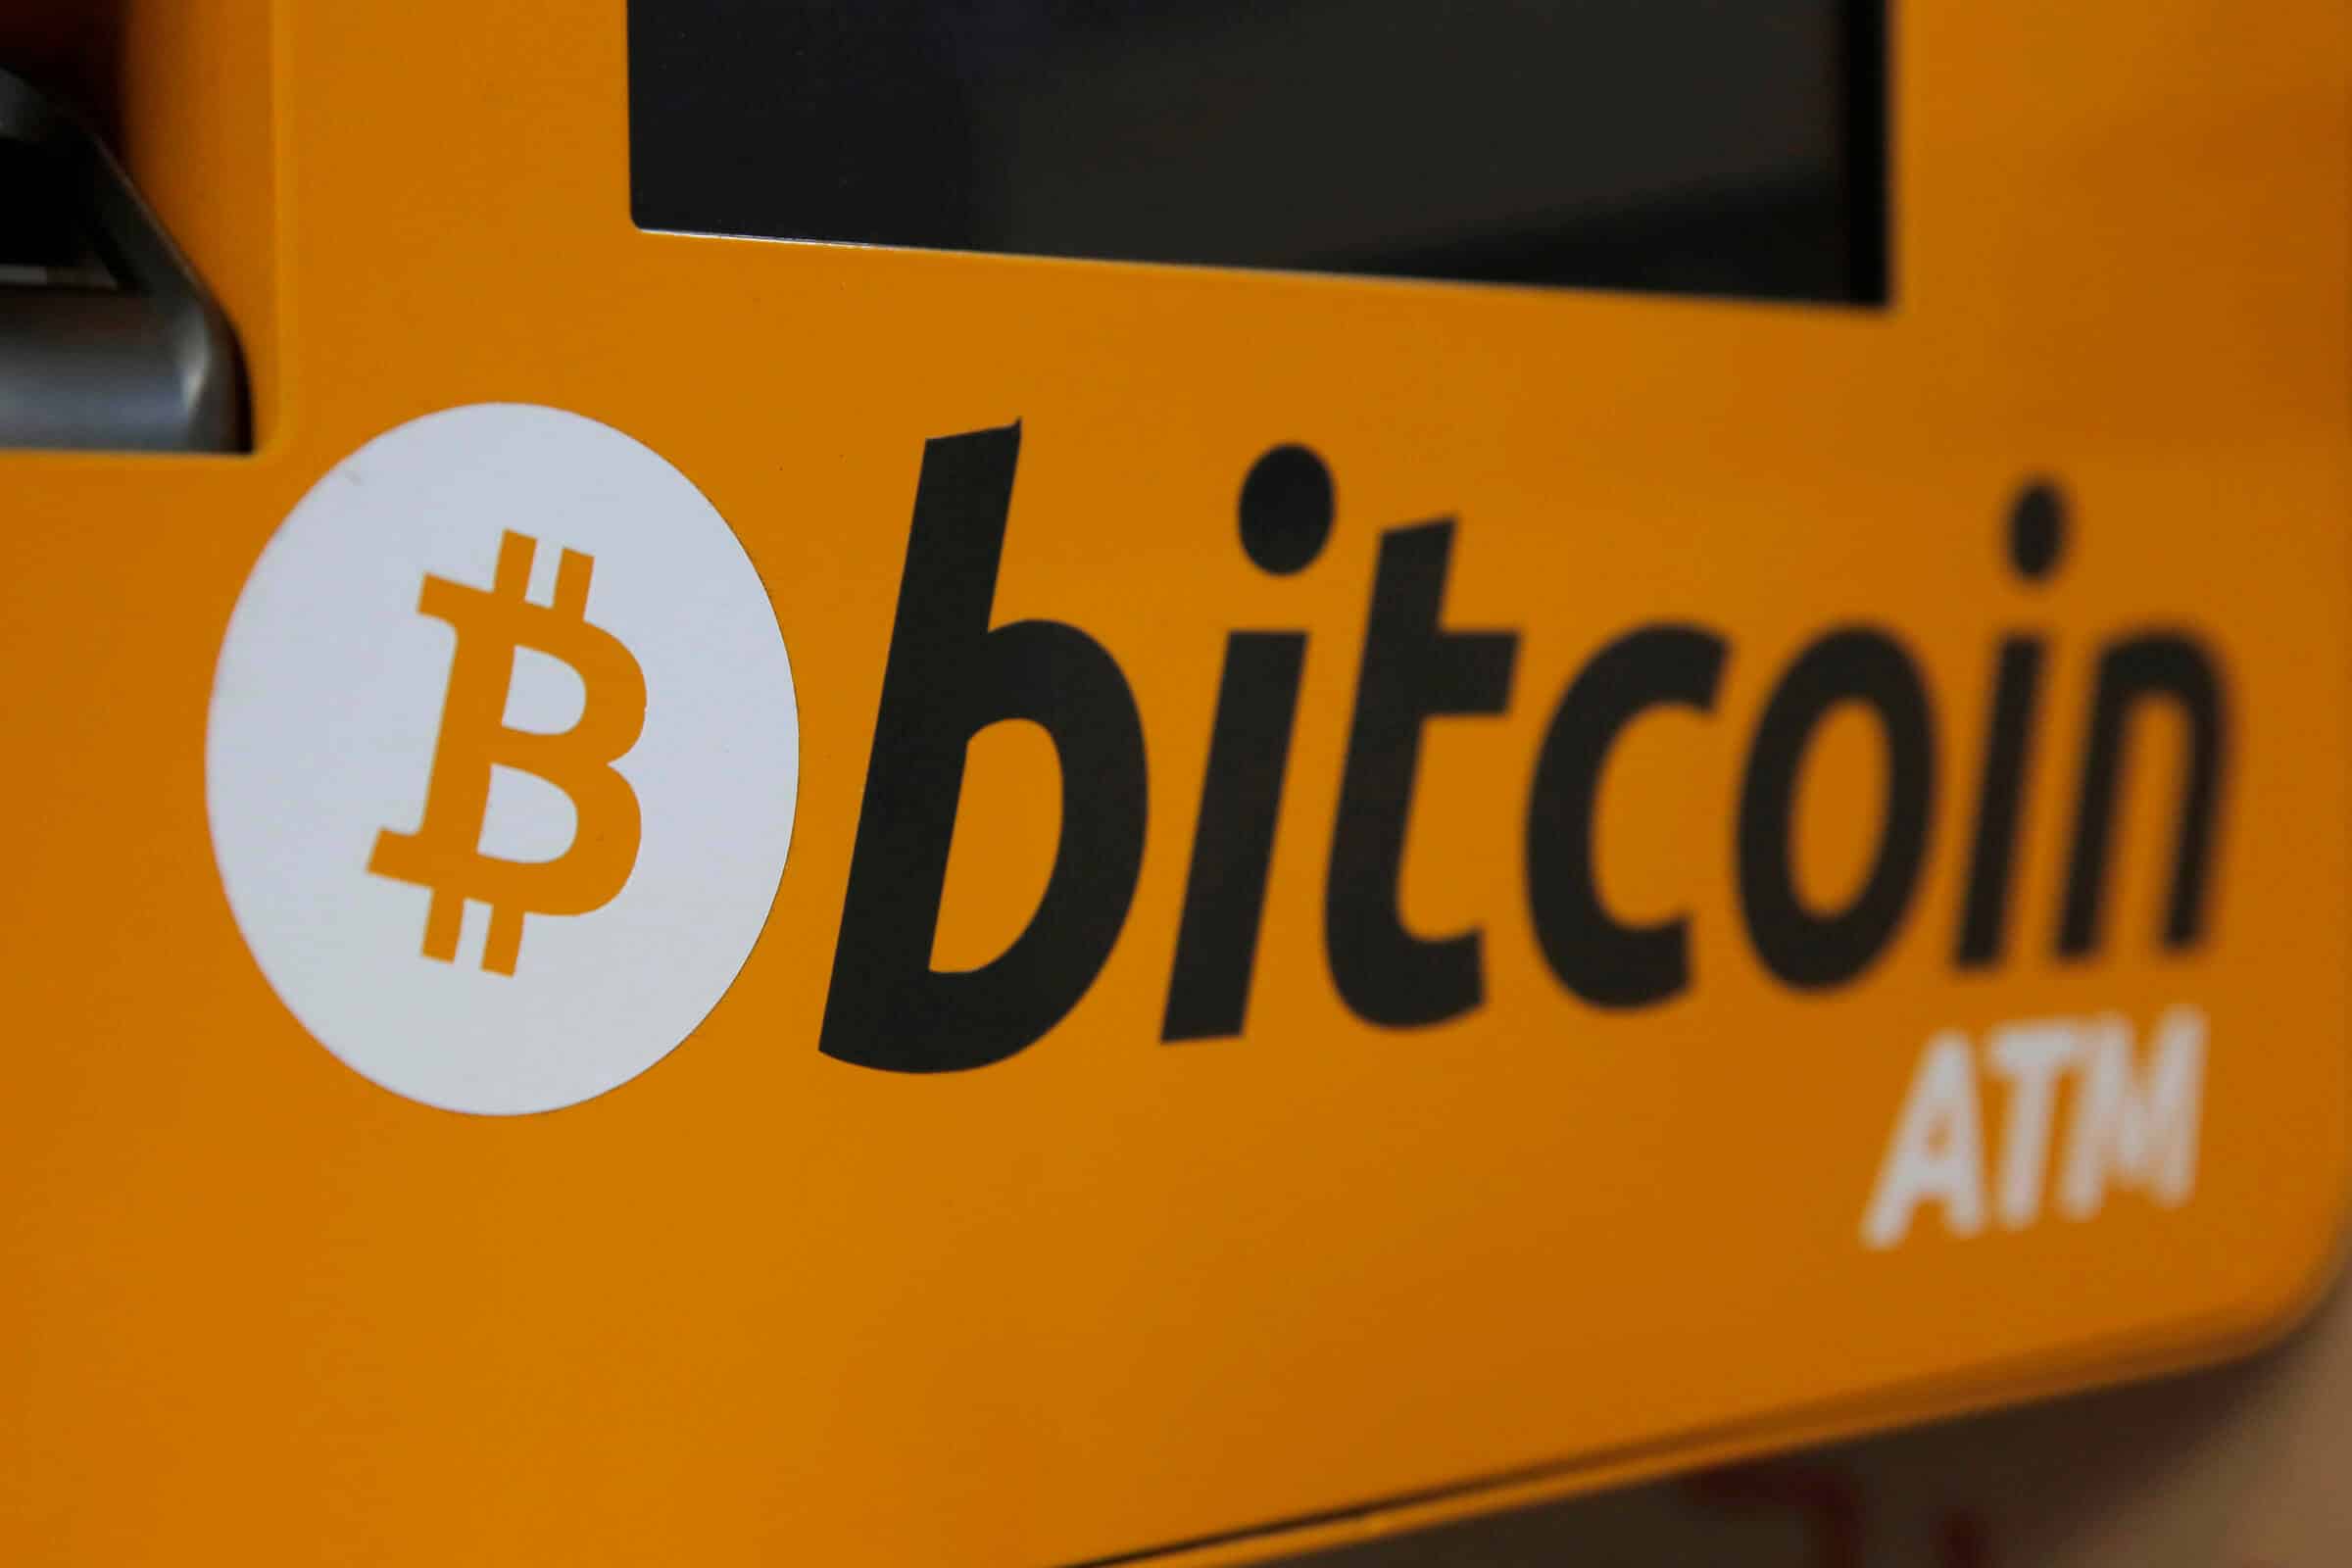 5 Top US Malls Now Have Bitcoin ATMs